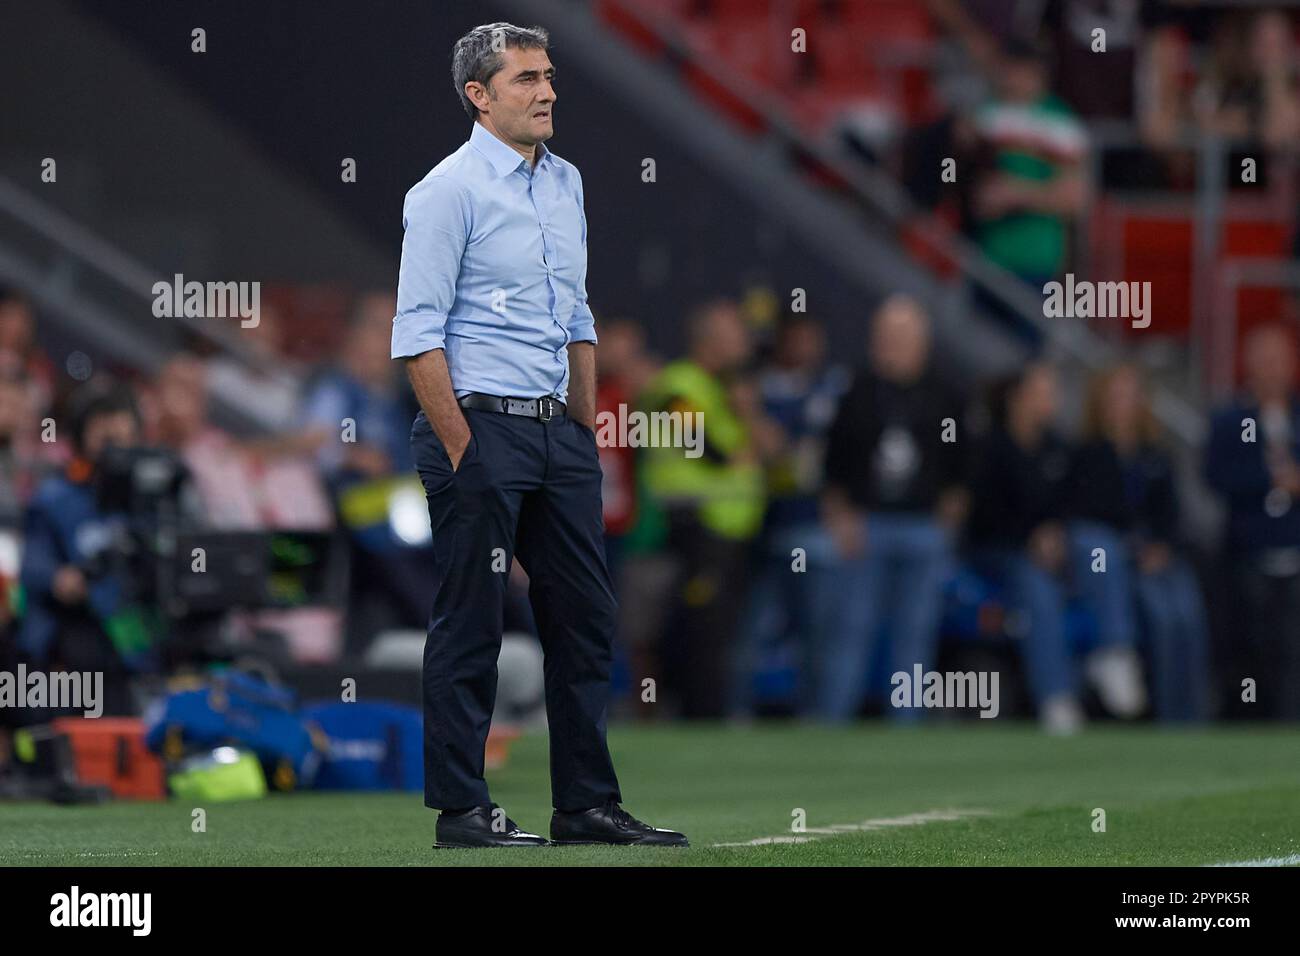 Bilbao, Spain. May 4, 2023, Athletic Club head coach Ernesto Valverde during the La Liga match between Athletic Club and Real Betis played at San Mames Stadium on May 4, 2023 in Bilbao, Spain. (Photo by Cesar Ortiz / PRESSIN) Stock Photo